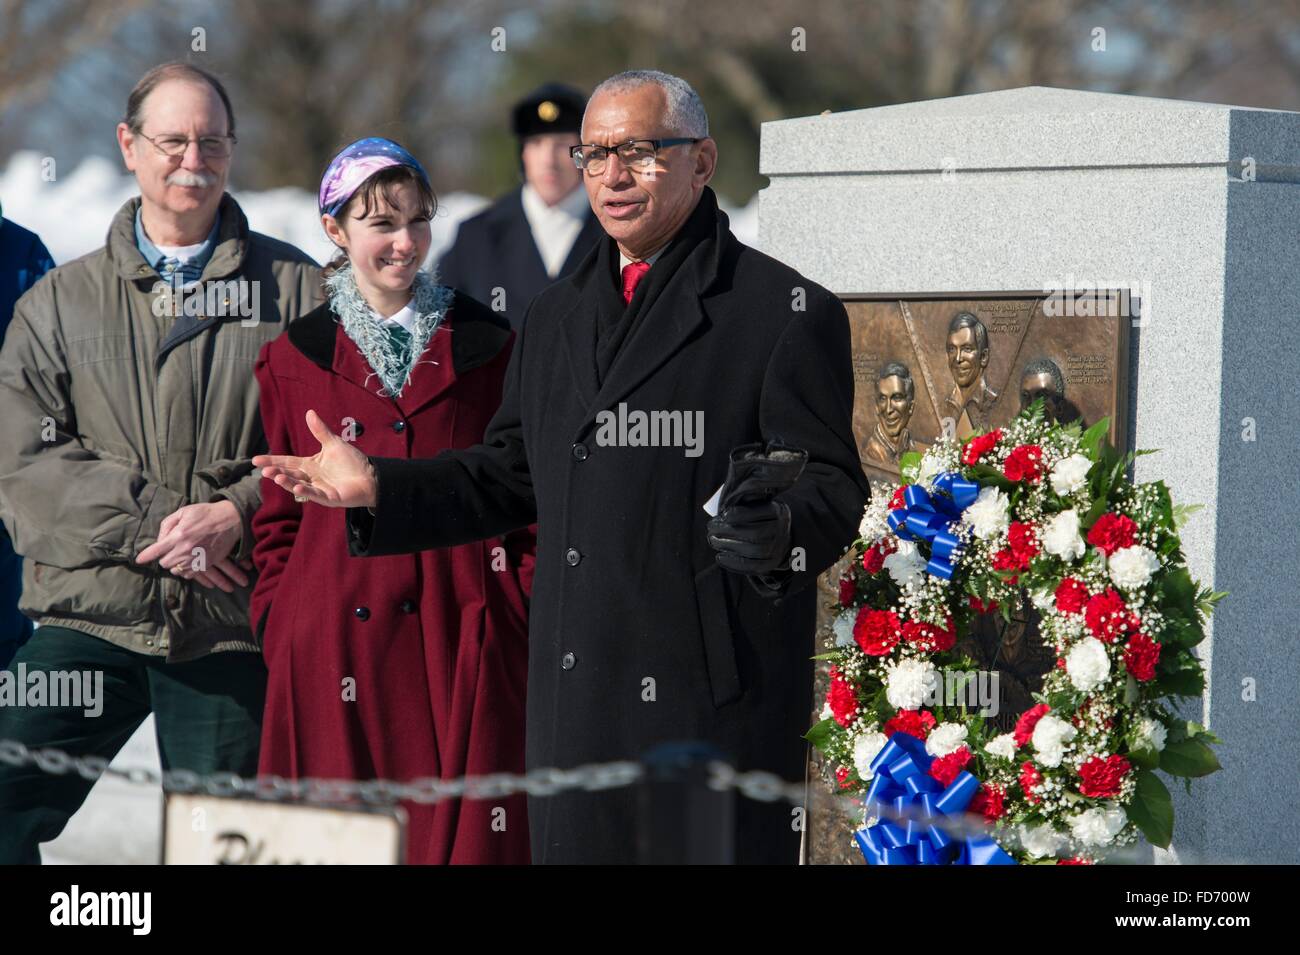 Arlington, Virginia, USA. 28th January, 2016. NASA Administrator Charles Bolden alongside Chuck Resnik, left, brother of Challenger astronaut Judith Resnik and his daughter, Jenna Resnik, during a wreath laying ceremony as part of NASA's Day of Remembrance on the 30th anniversary of the Challenger explosion at Arlington National Cemetery January 28, 2016 in Arlington, Virginia. The wreaths were placed in memory of those men and women who lost their lives in the quest for space exploration. Credit:  Planetpix/Alamy Live News Stock Photo